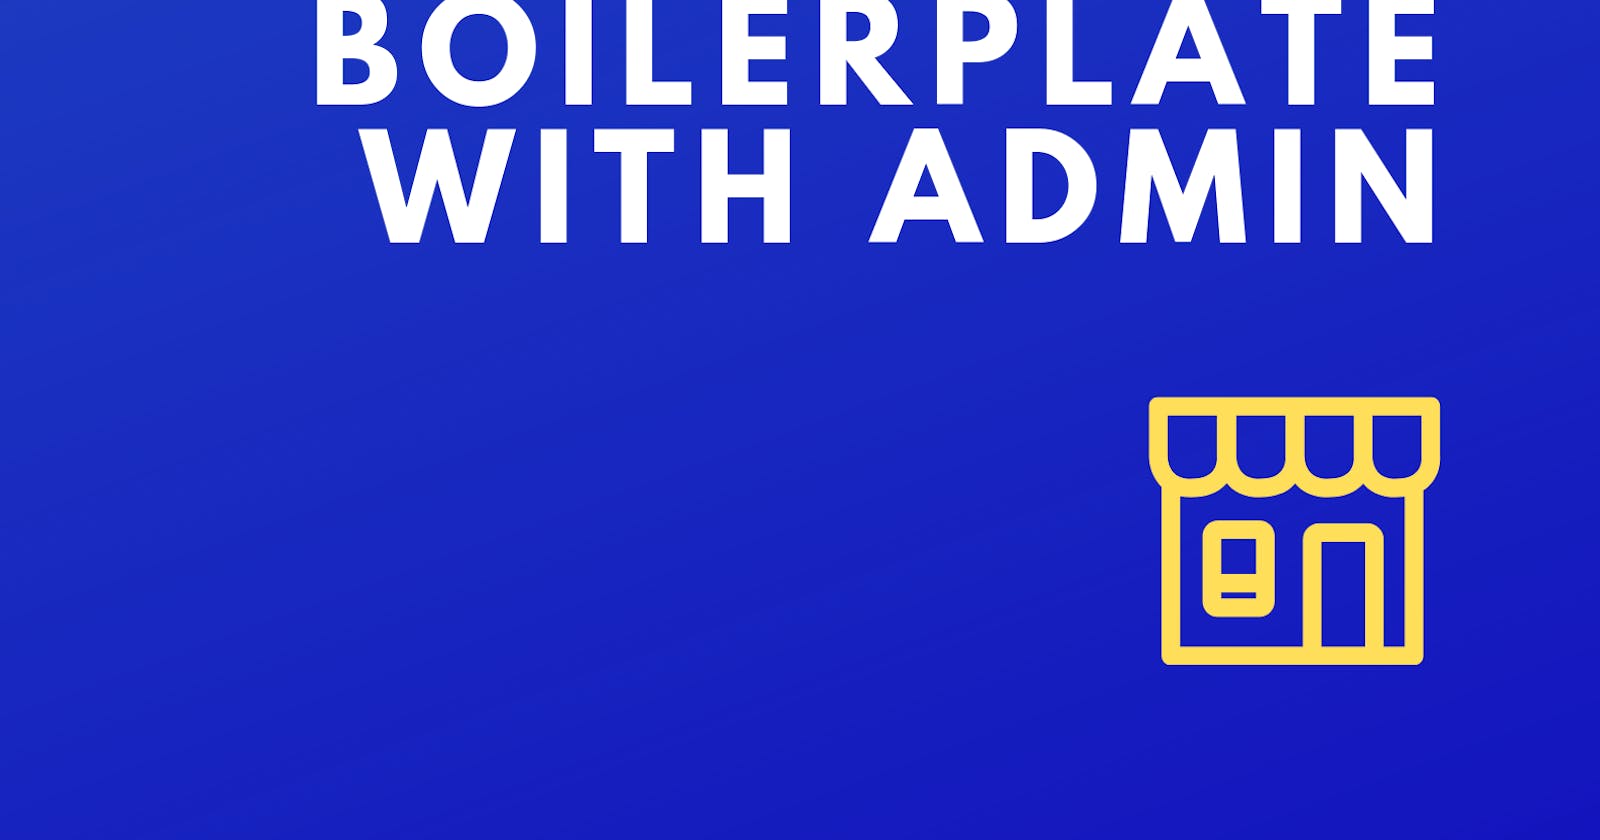 Check out the FULL ECOMMERCE boilerplate With ADMIN Panel